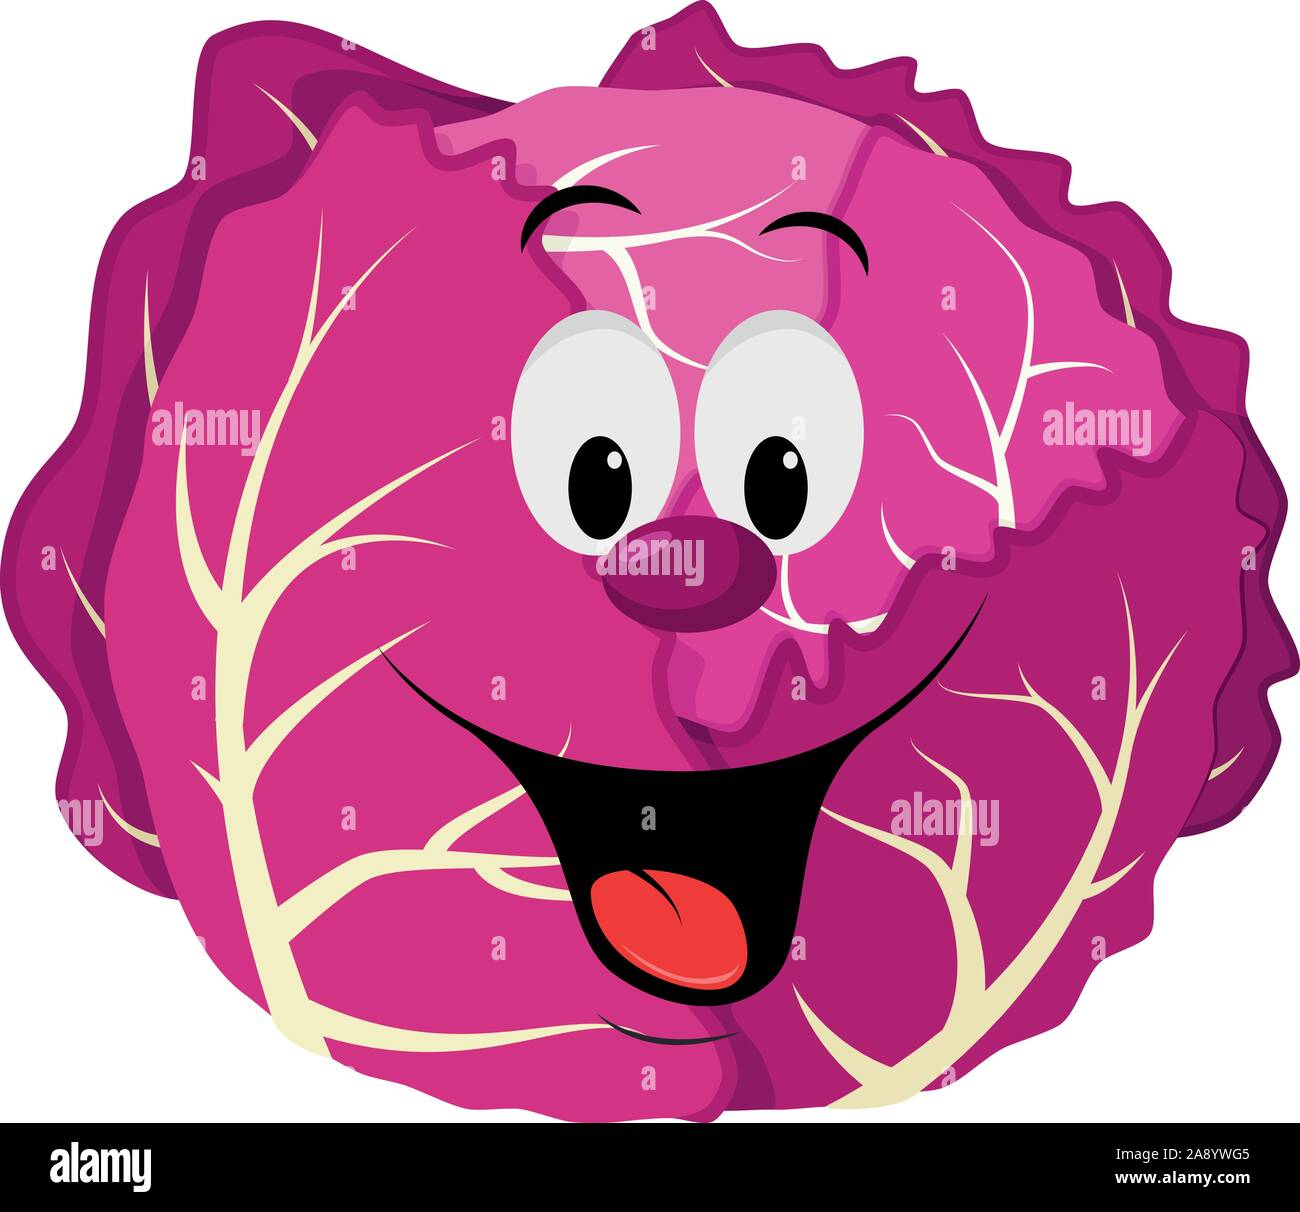 Vegetables Characters Collection: Vector illustration of a funny and smiling purple cabbage in cartoon style. Stock Vector